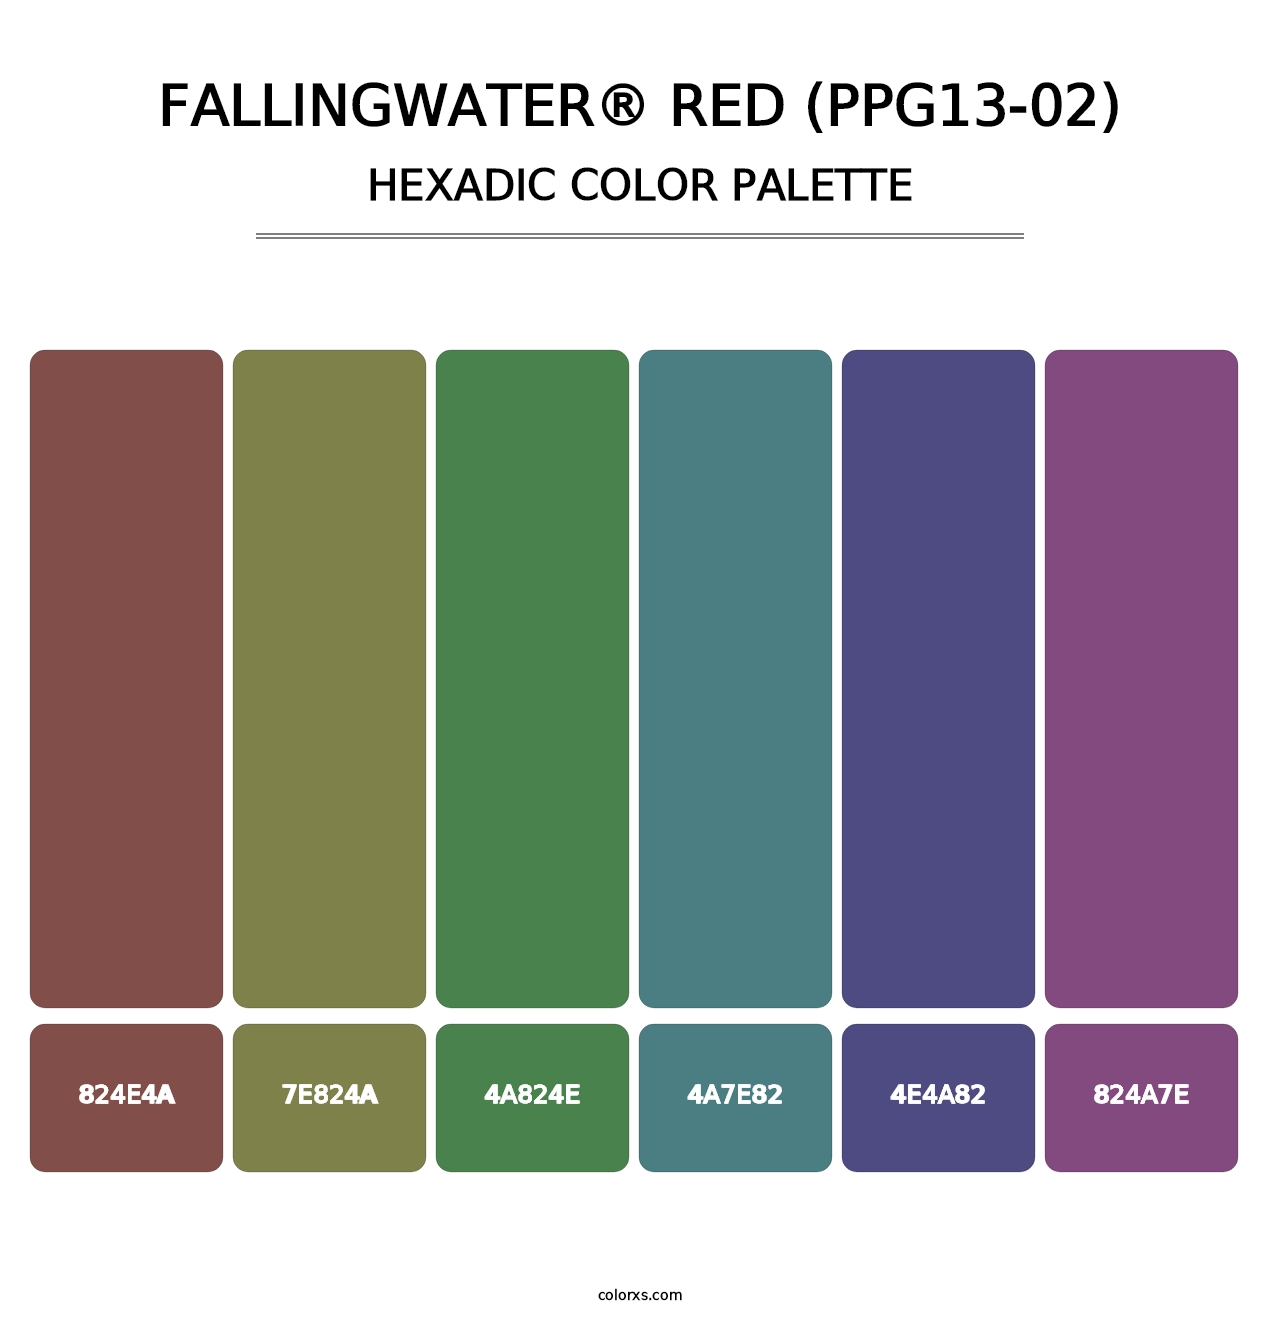 Fallingwater® Red (PPG13-02) - Hexadic Color Palette